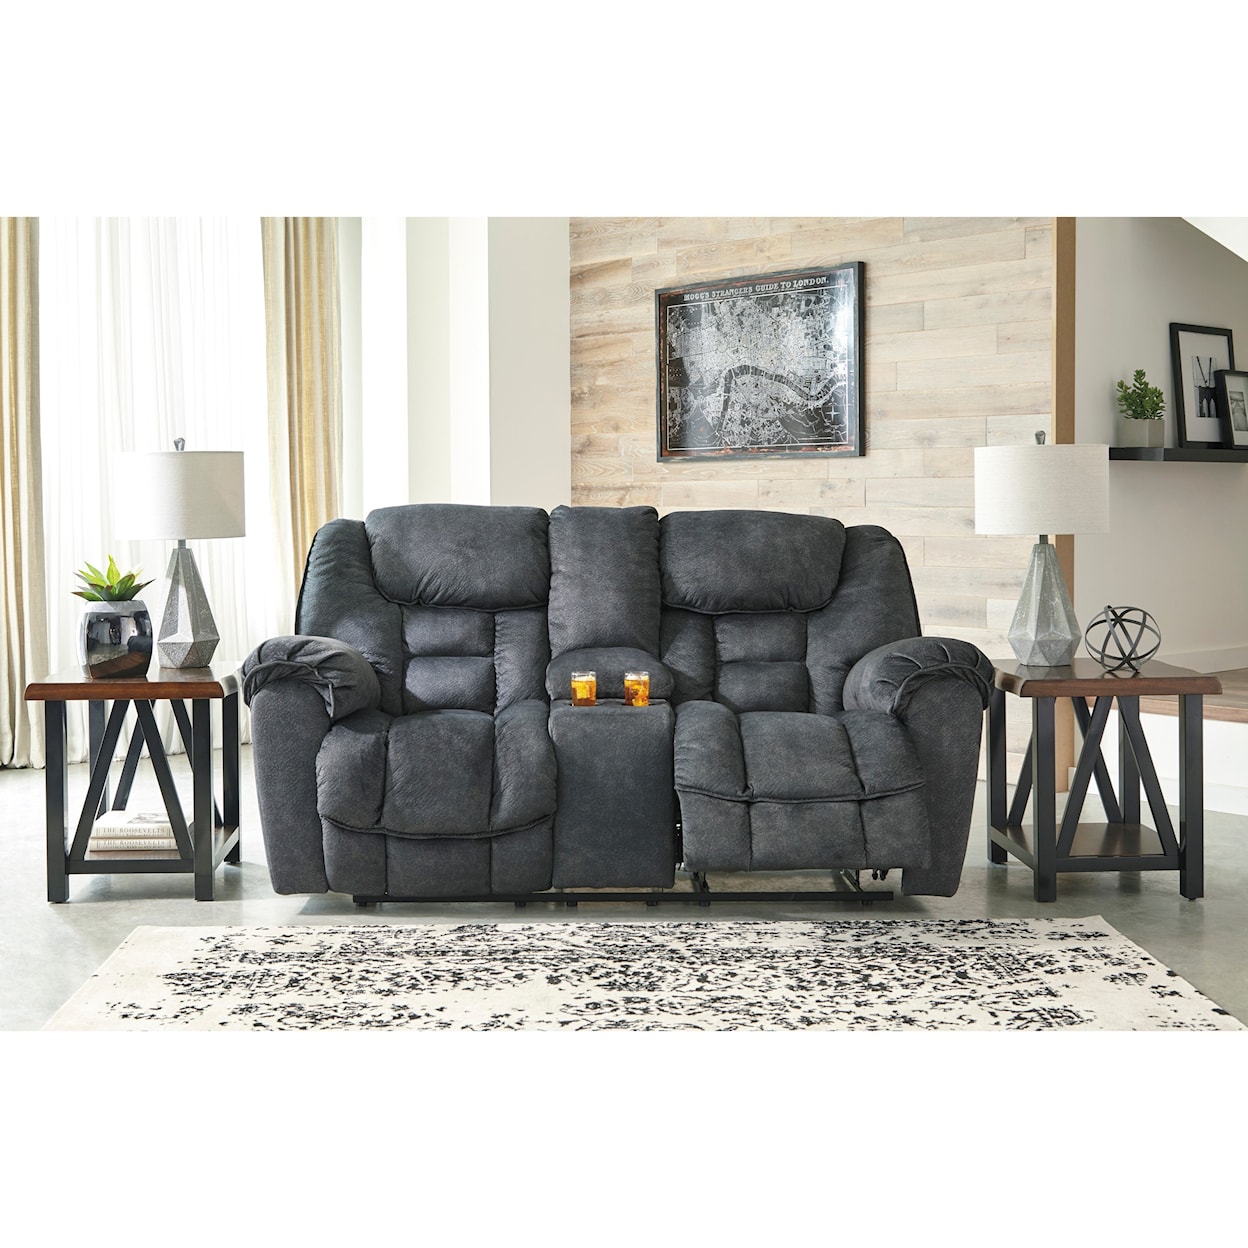 Signature Design by Ashley Furniture Capehorn Double Reclining Loveseat w/ Console